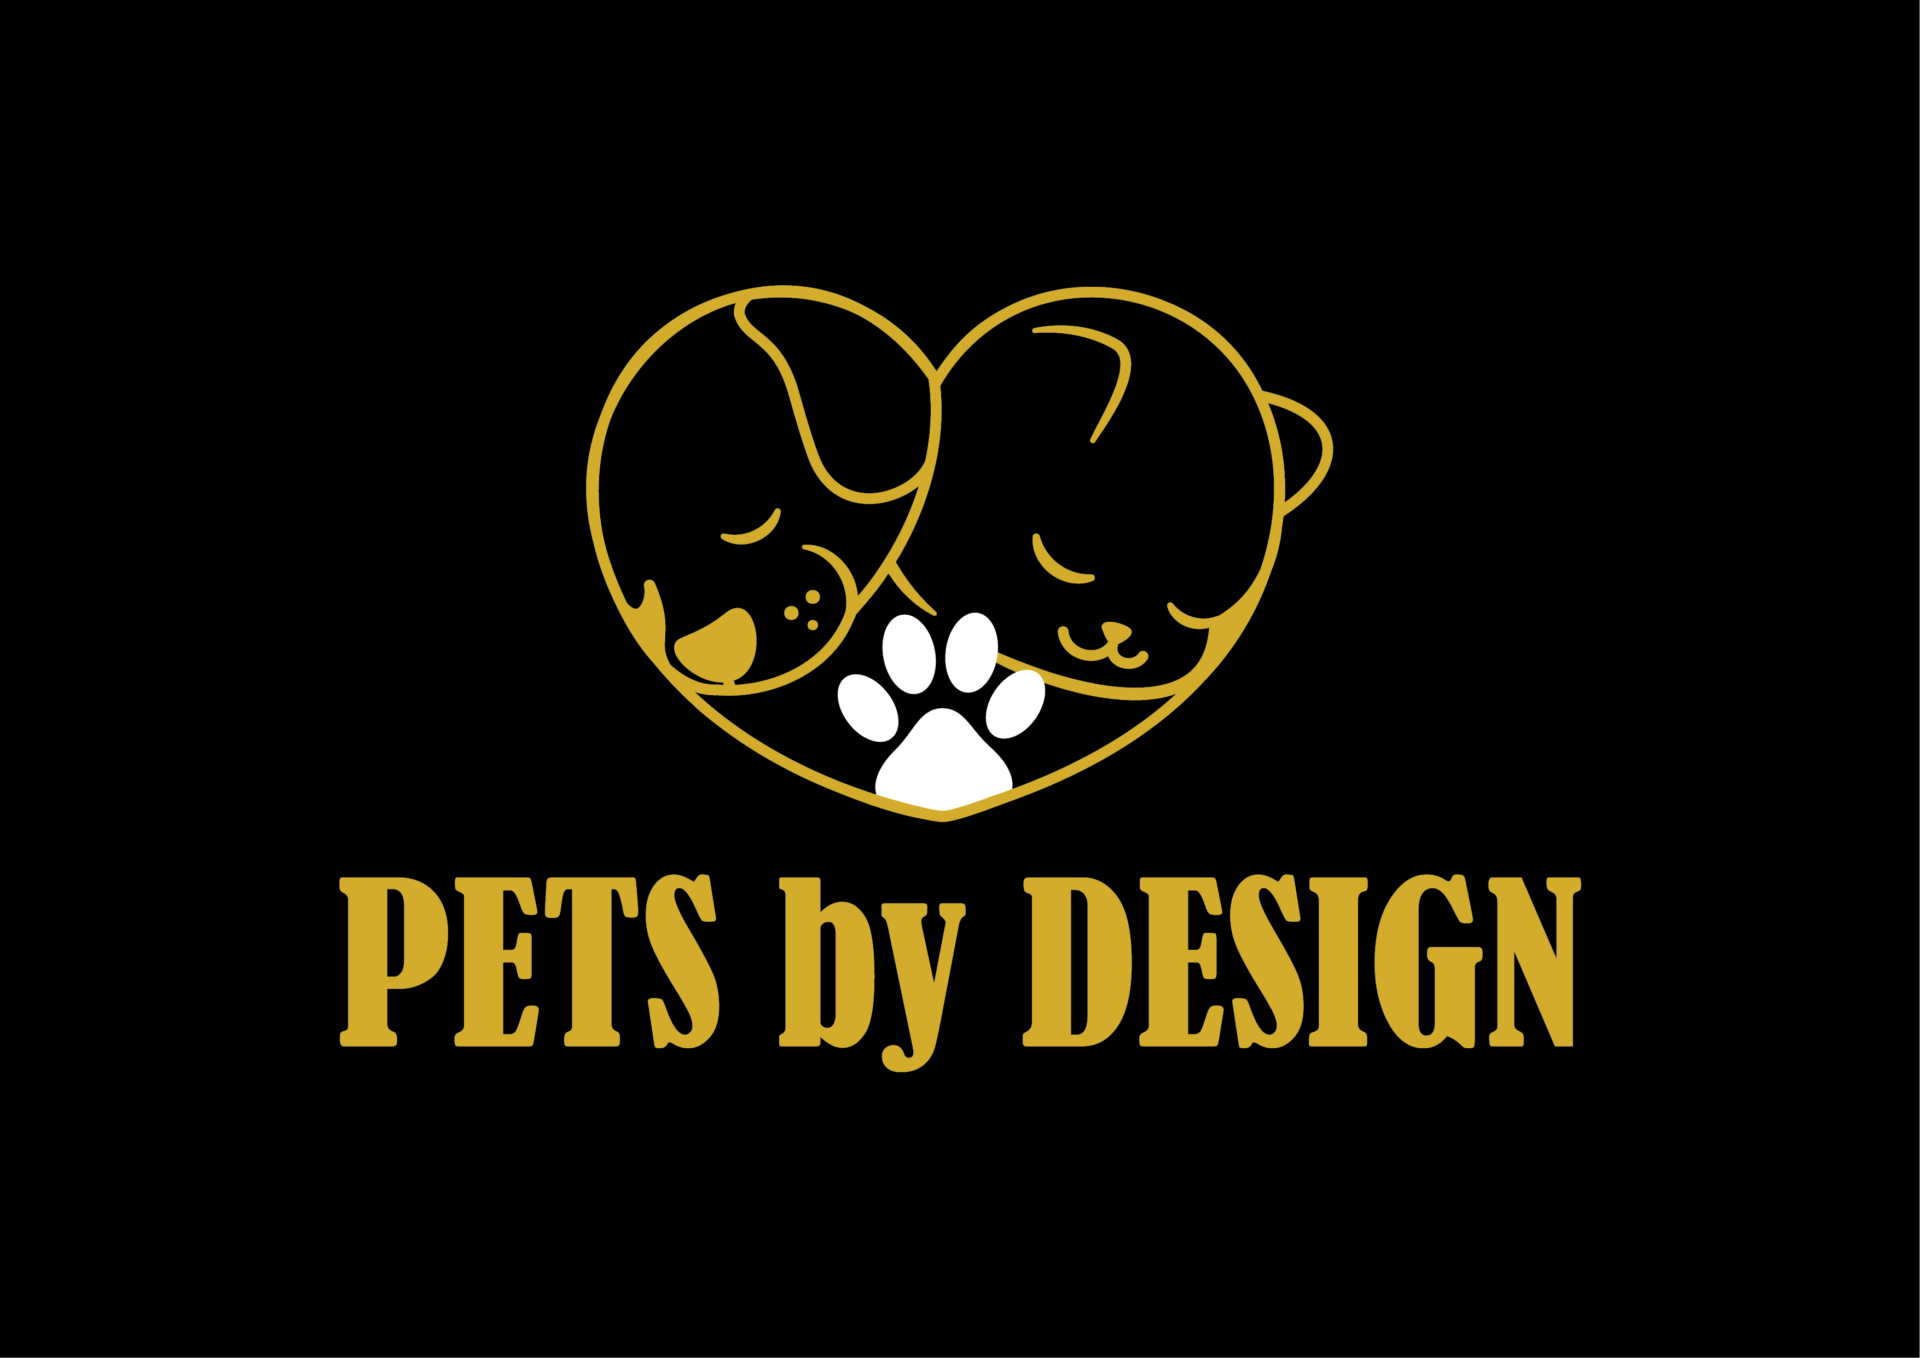 Pets by Design